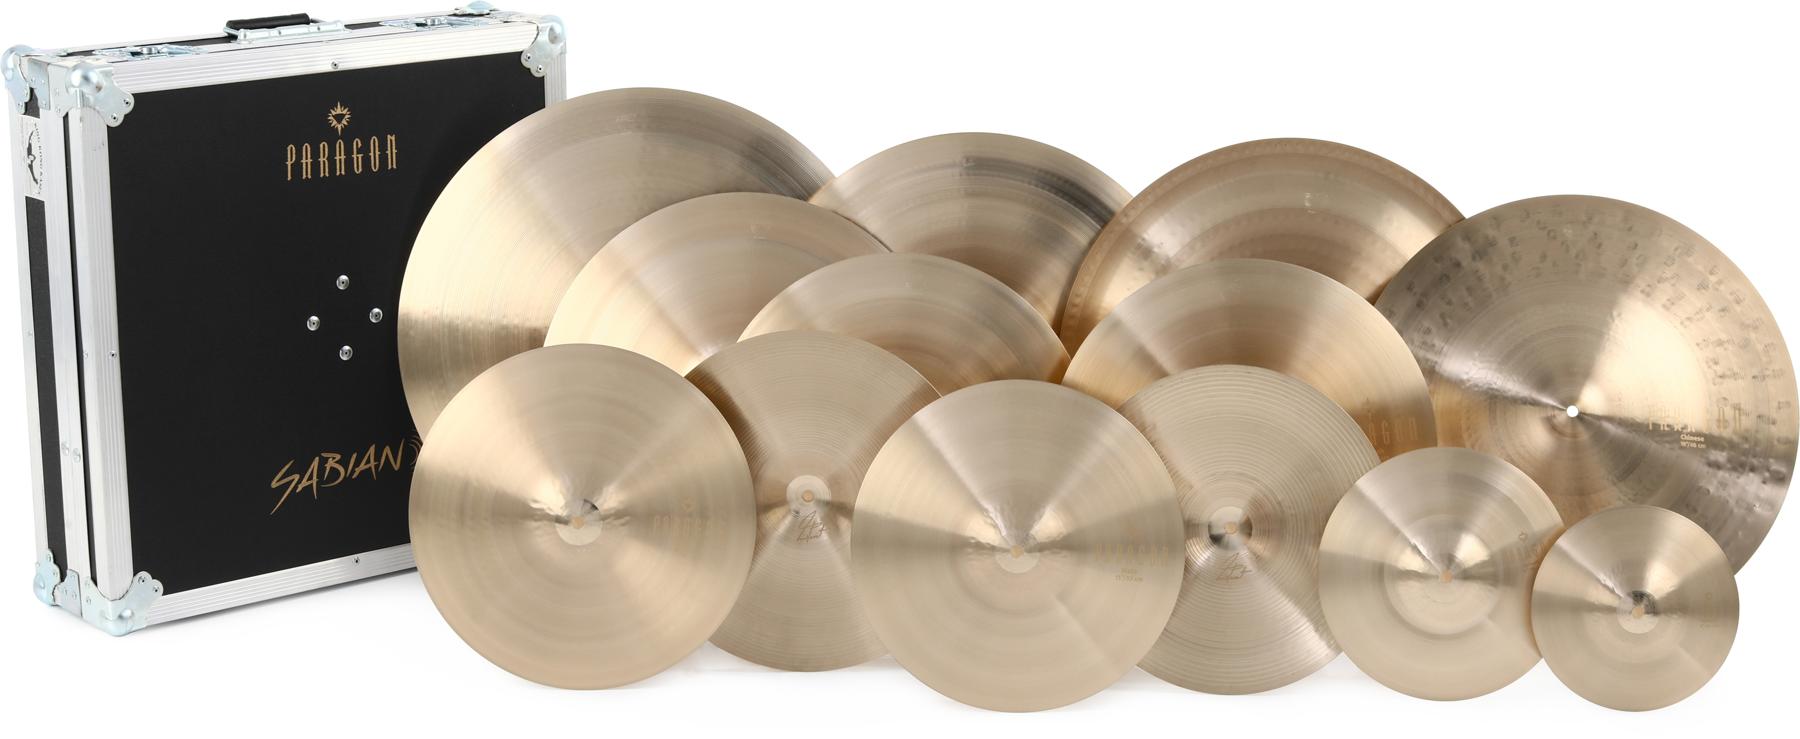 Sabian Paragon Neil Peart Complete Cymbal Set - 8/10/13/14/16/16/18/19/20/20/22 inch - with Flight Case